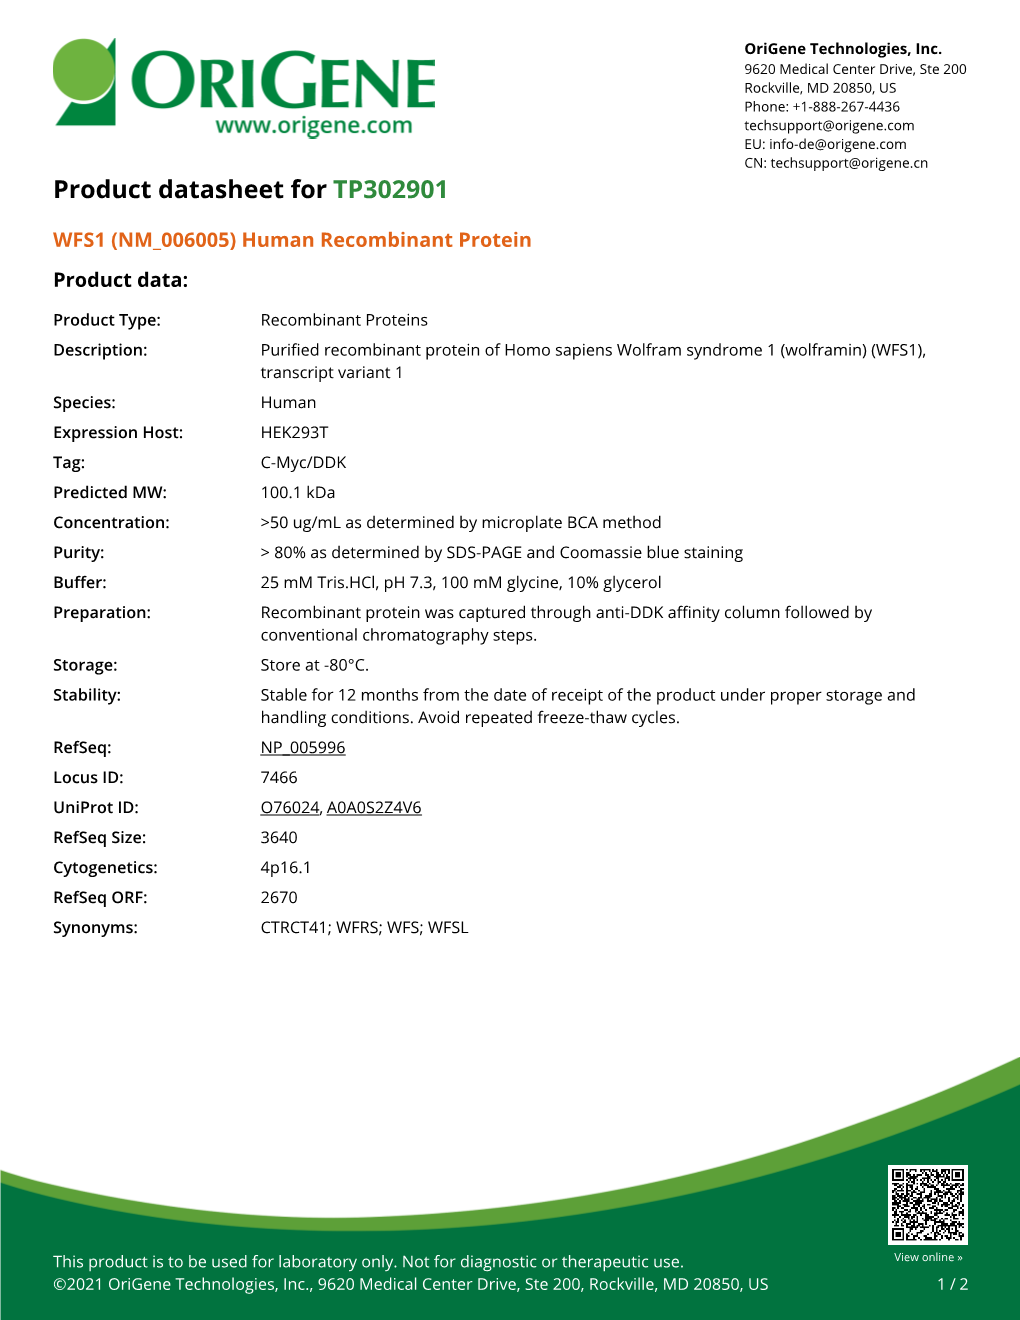 WFS1 (NM 006005) Human Recombinant Protein Product Data